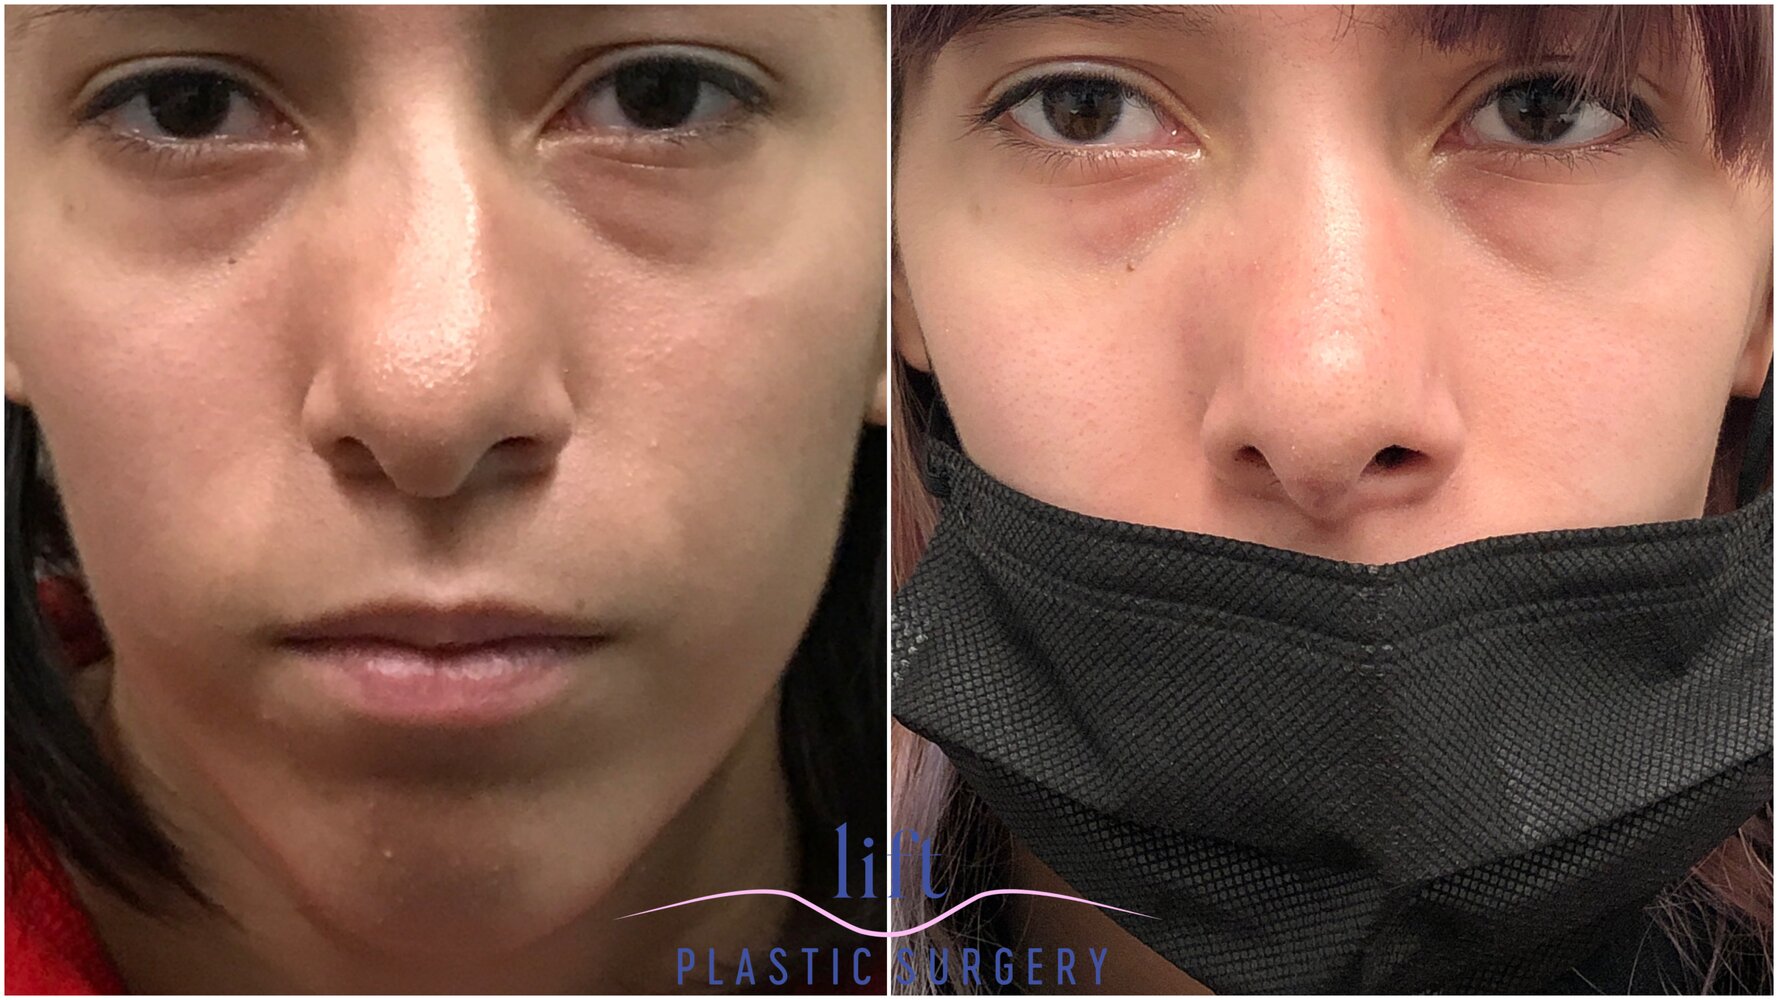 Rhinoplasty Before &#038; After Photos